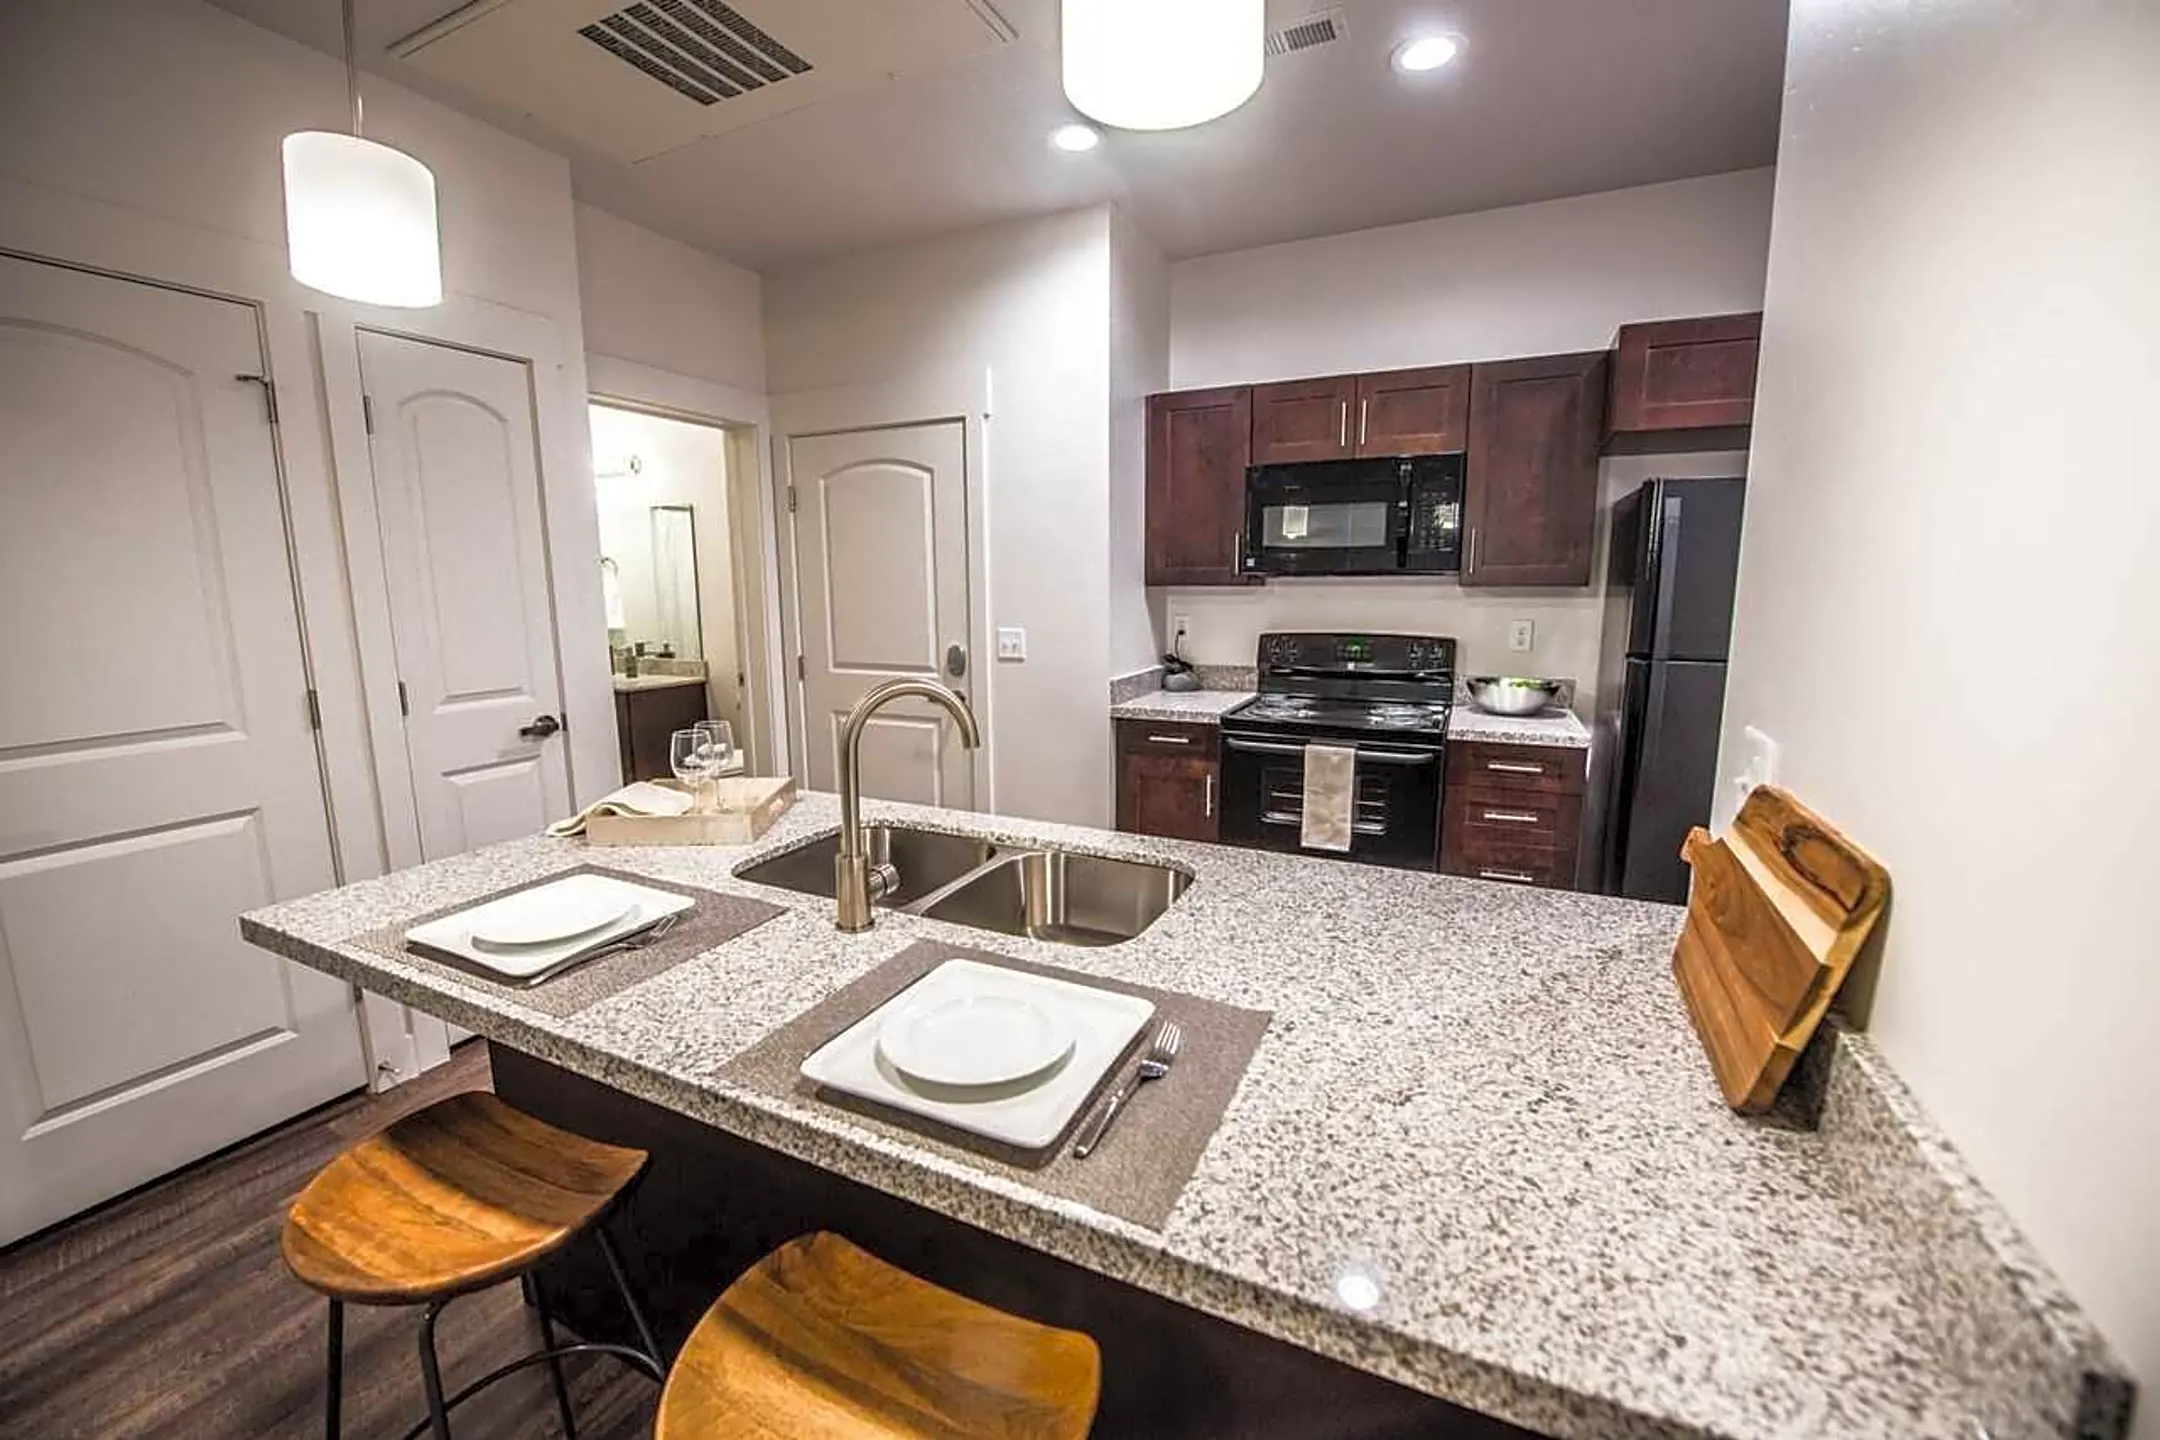 City Centre Apartments - Clearfield, UT